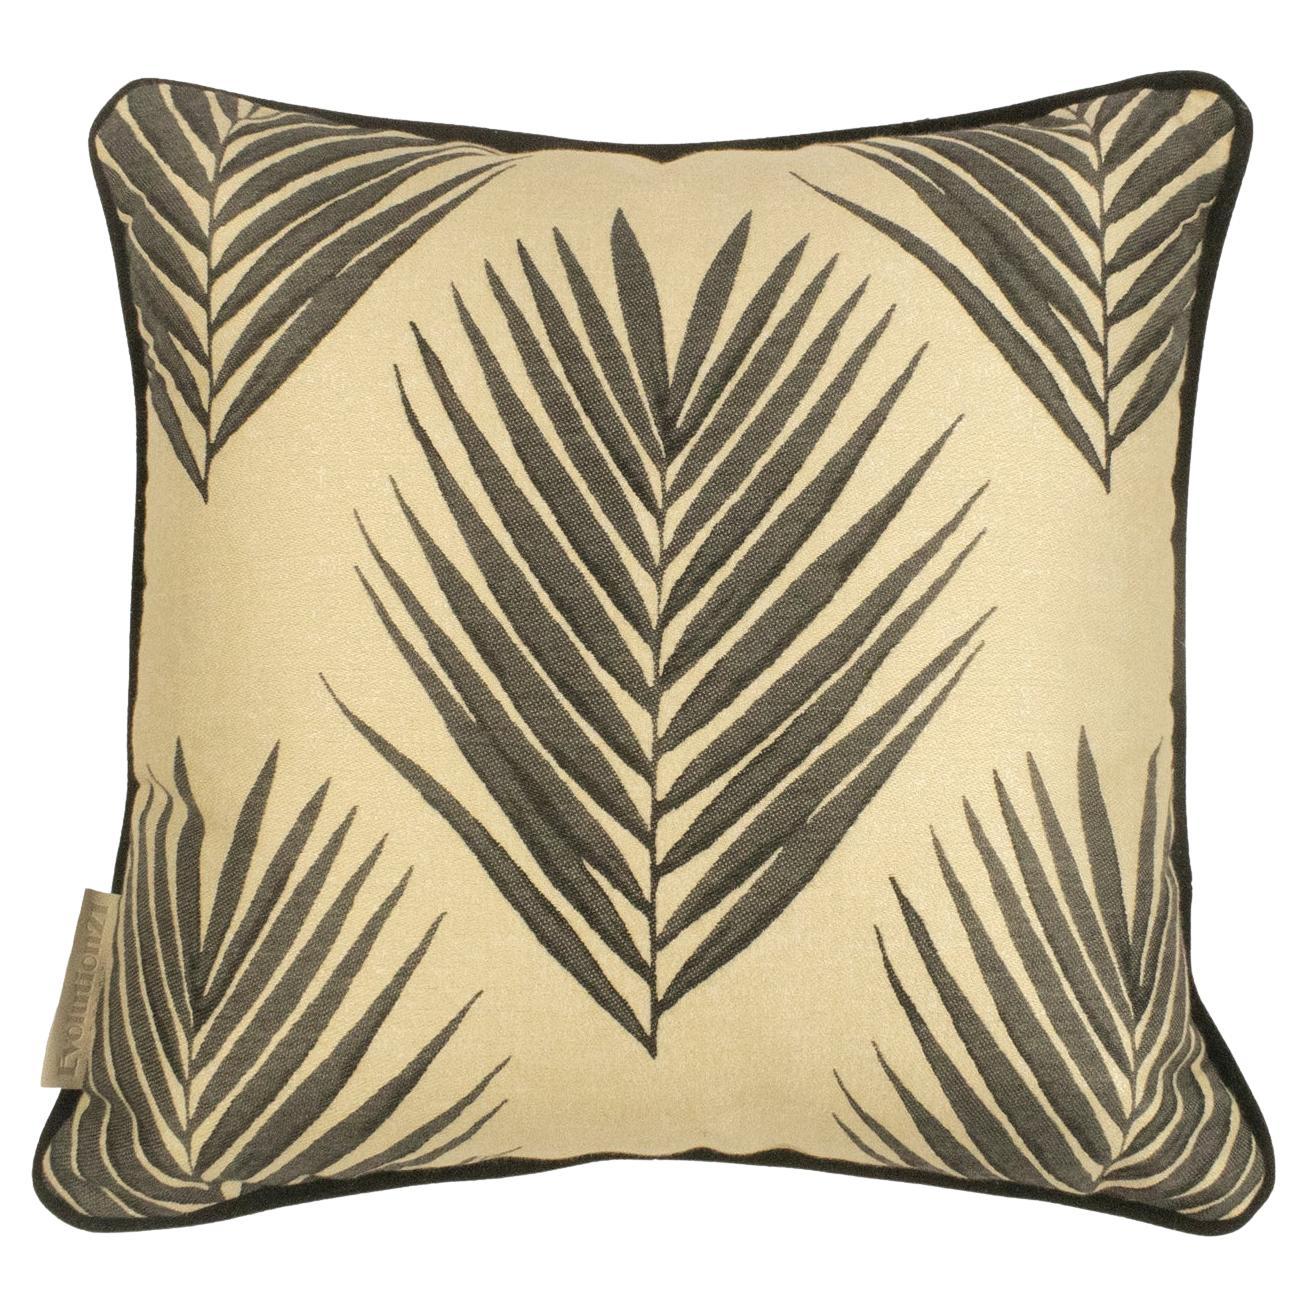 Cushion / Pillow Patterned Bamboo Leaf Greyback by Evolution21